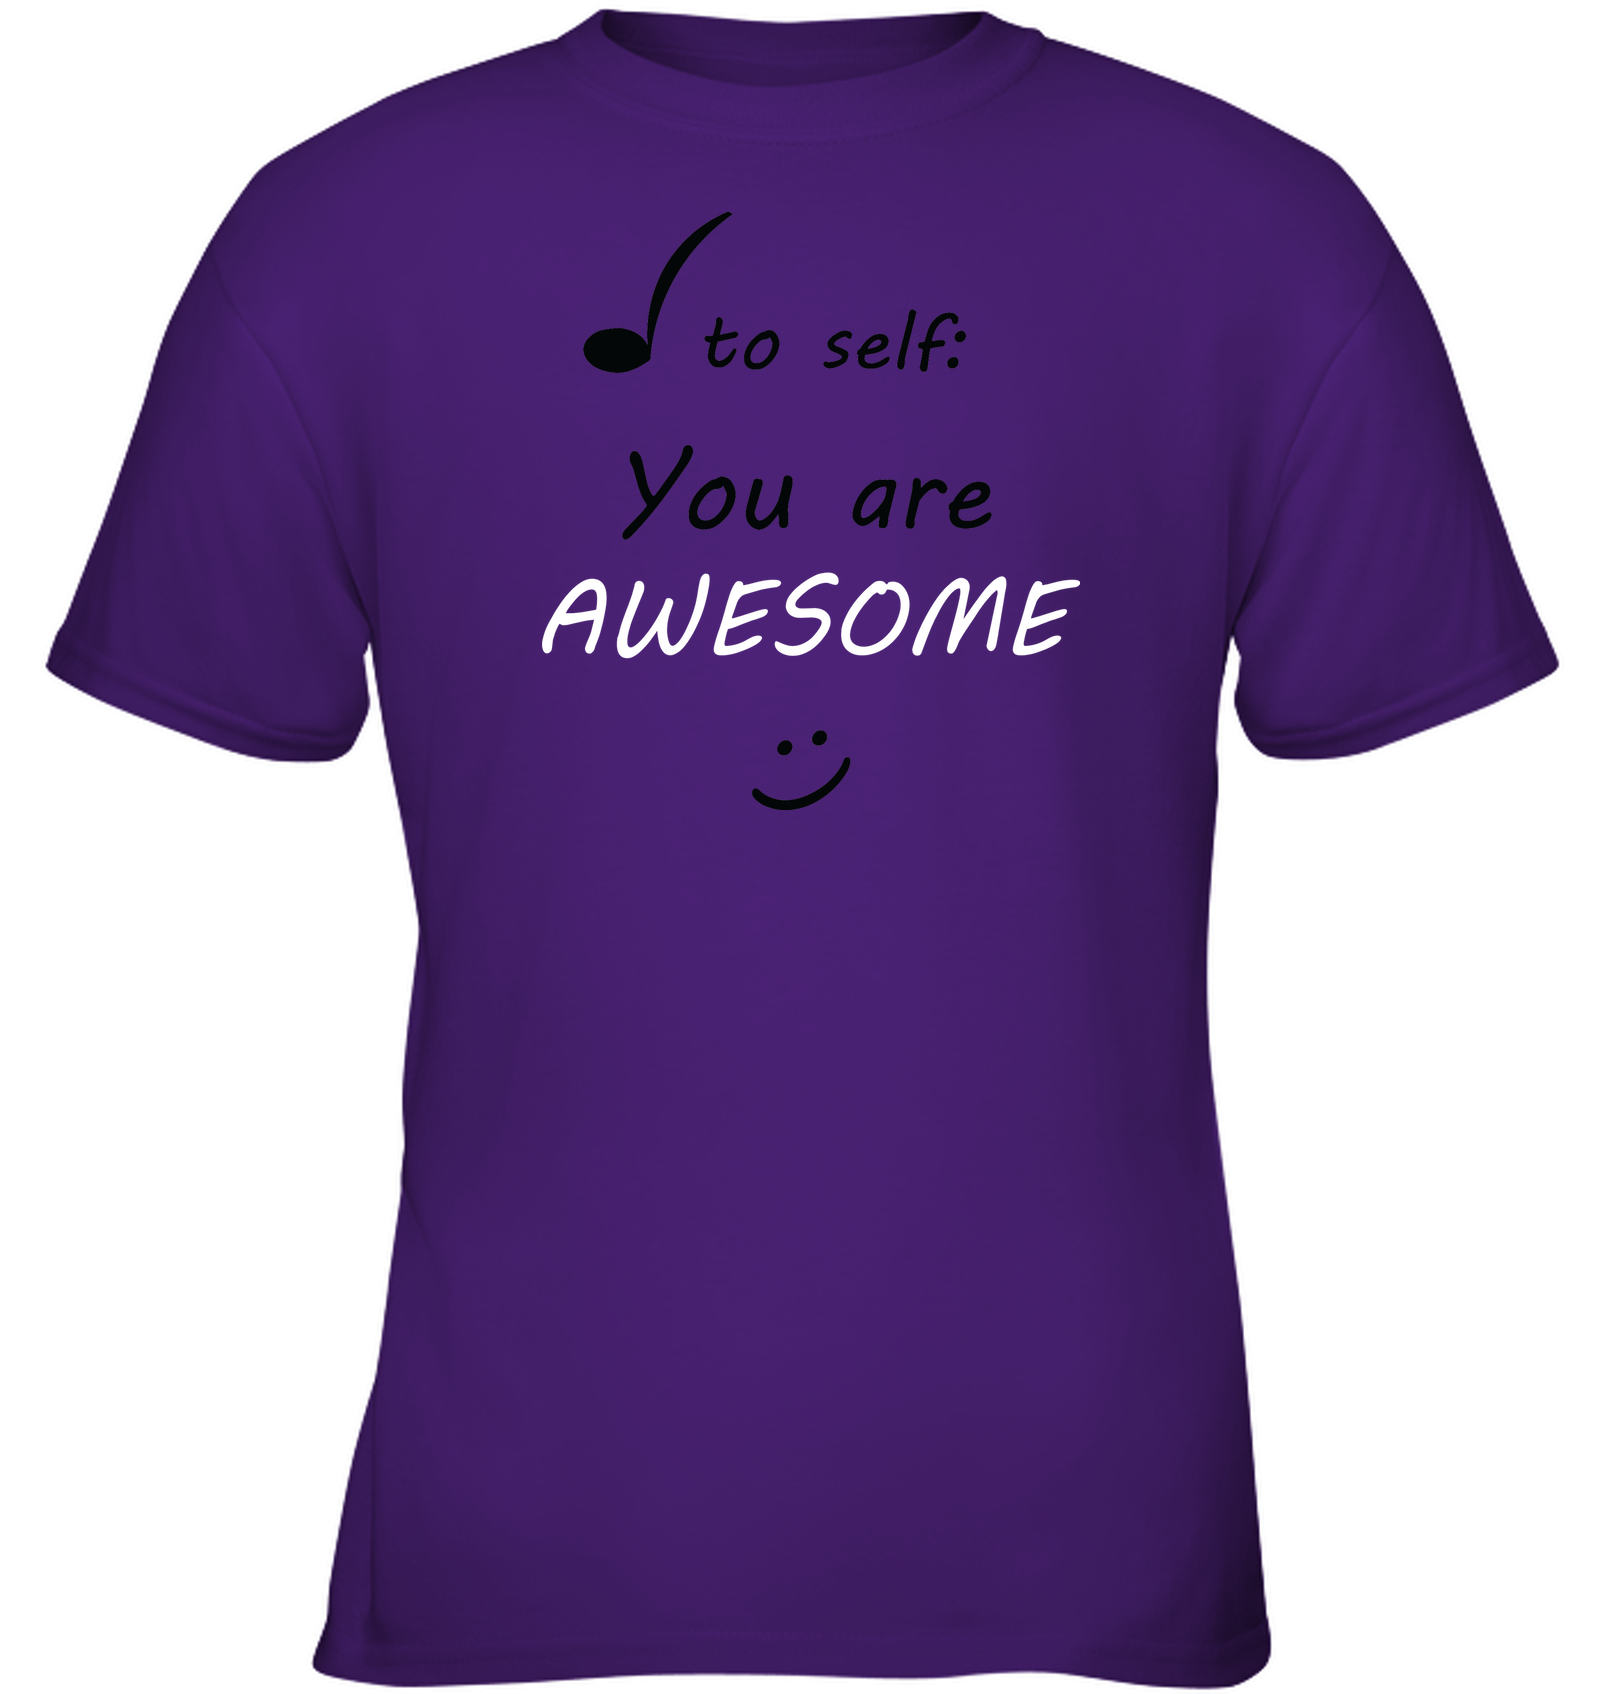 Note to Self, You Are Awesome - Gildan Youth Short Sleeve T-Shirt